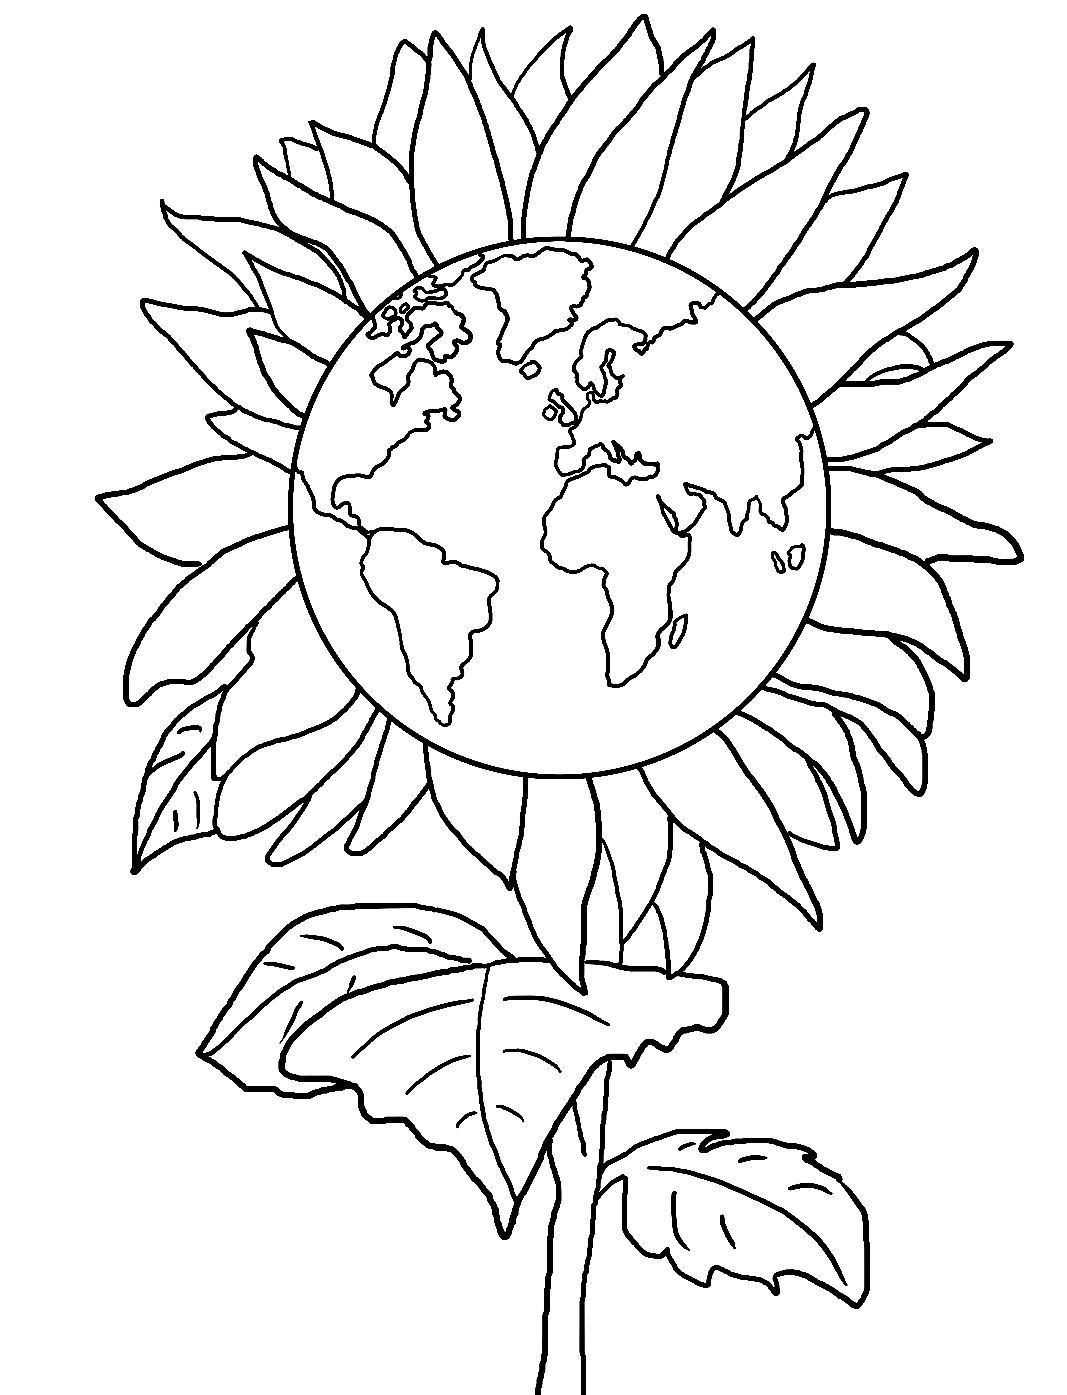 Sunflower Earth Day Coloring Page